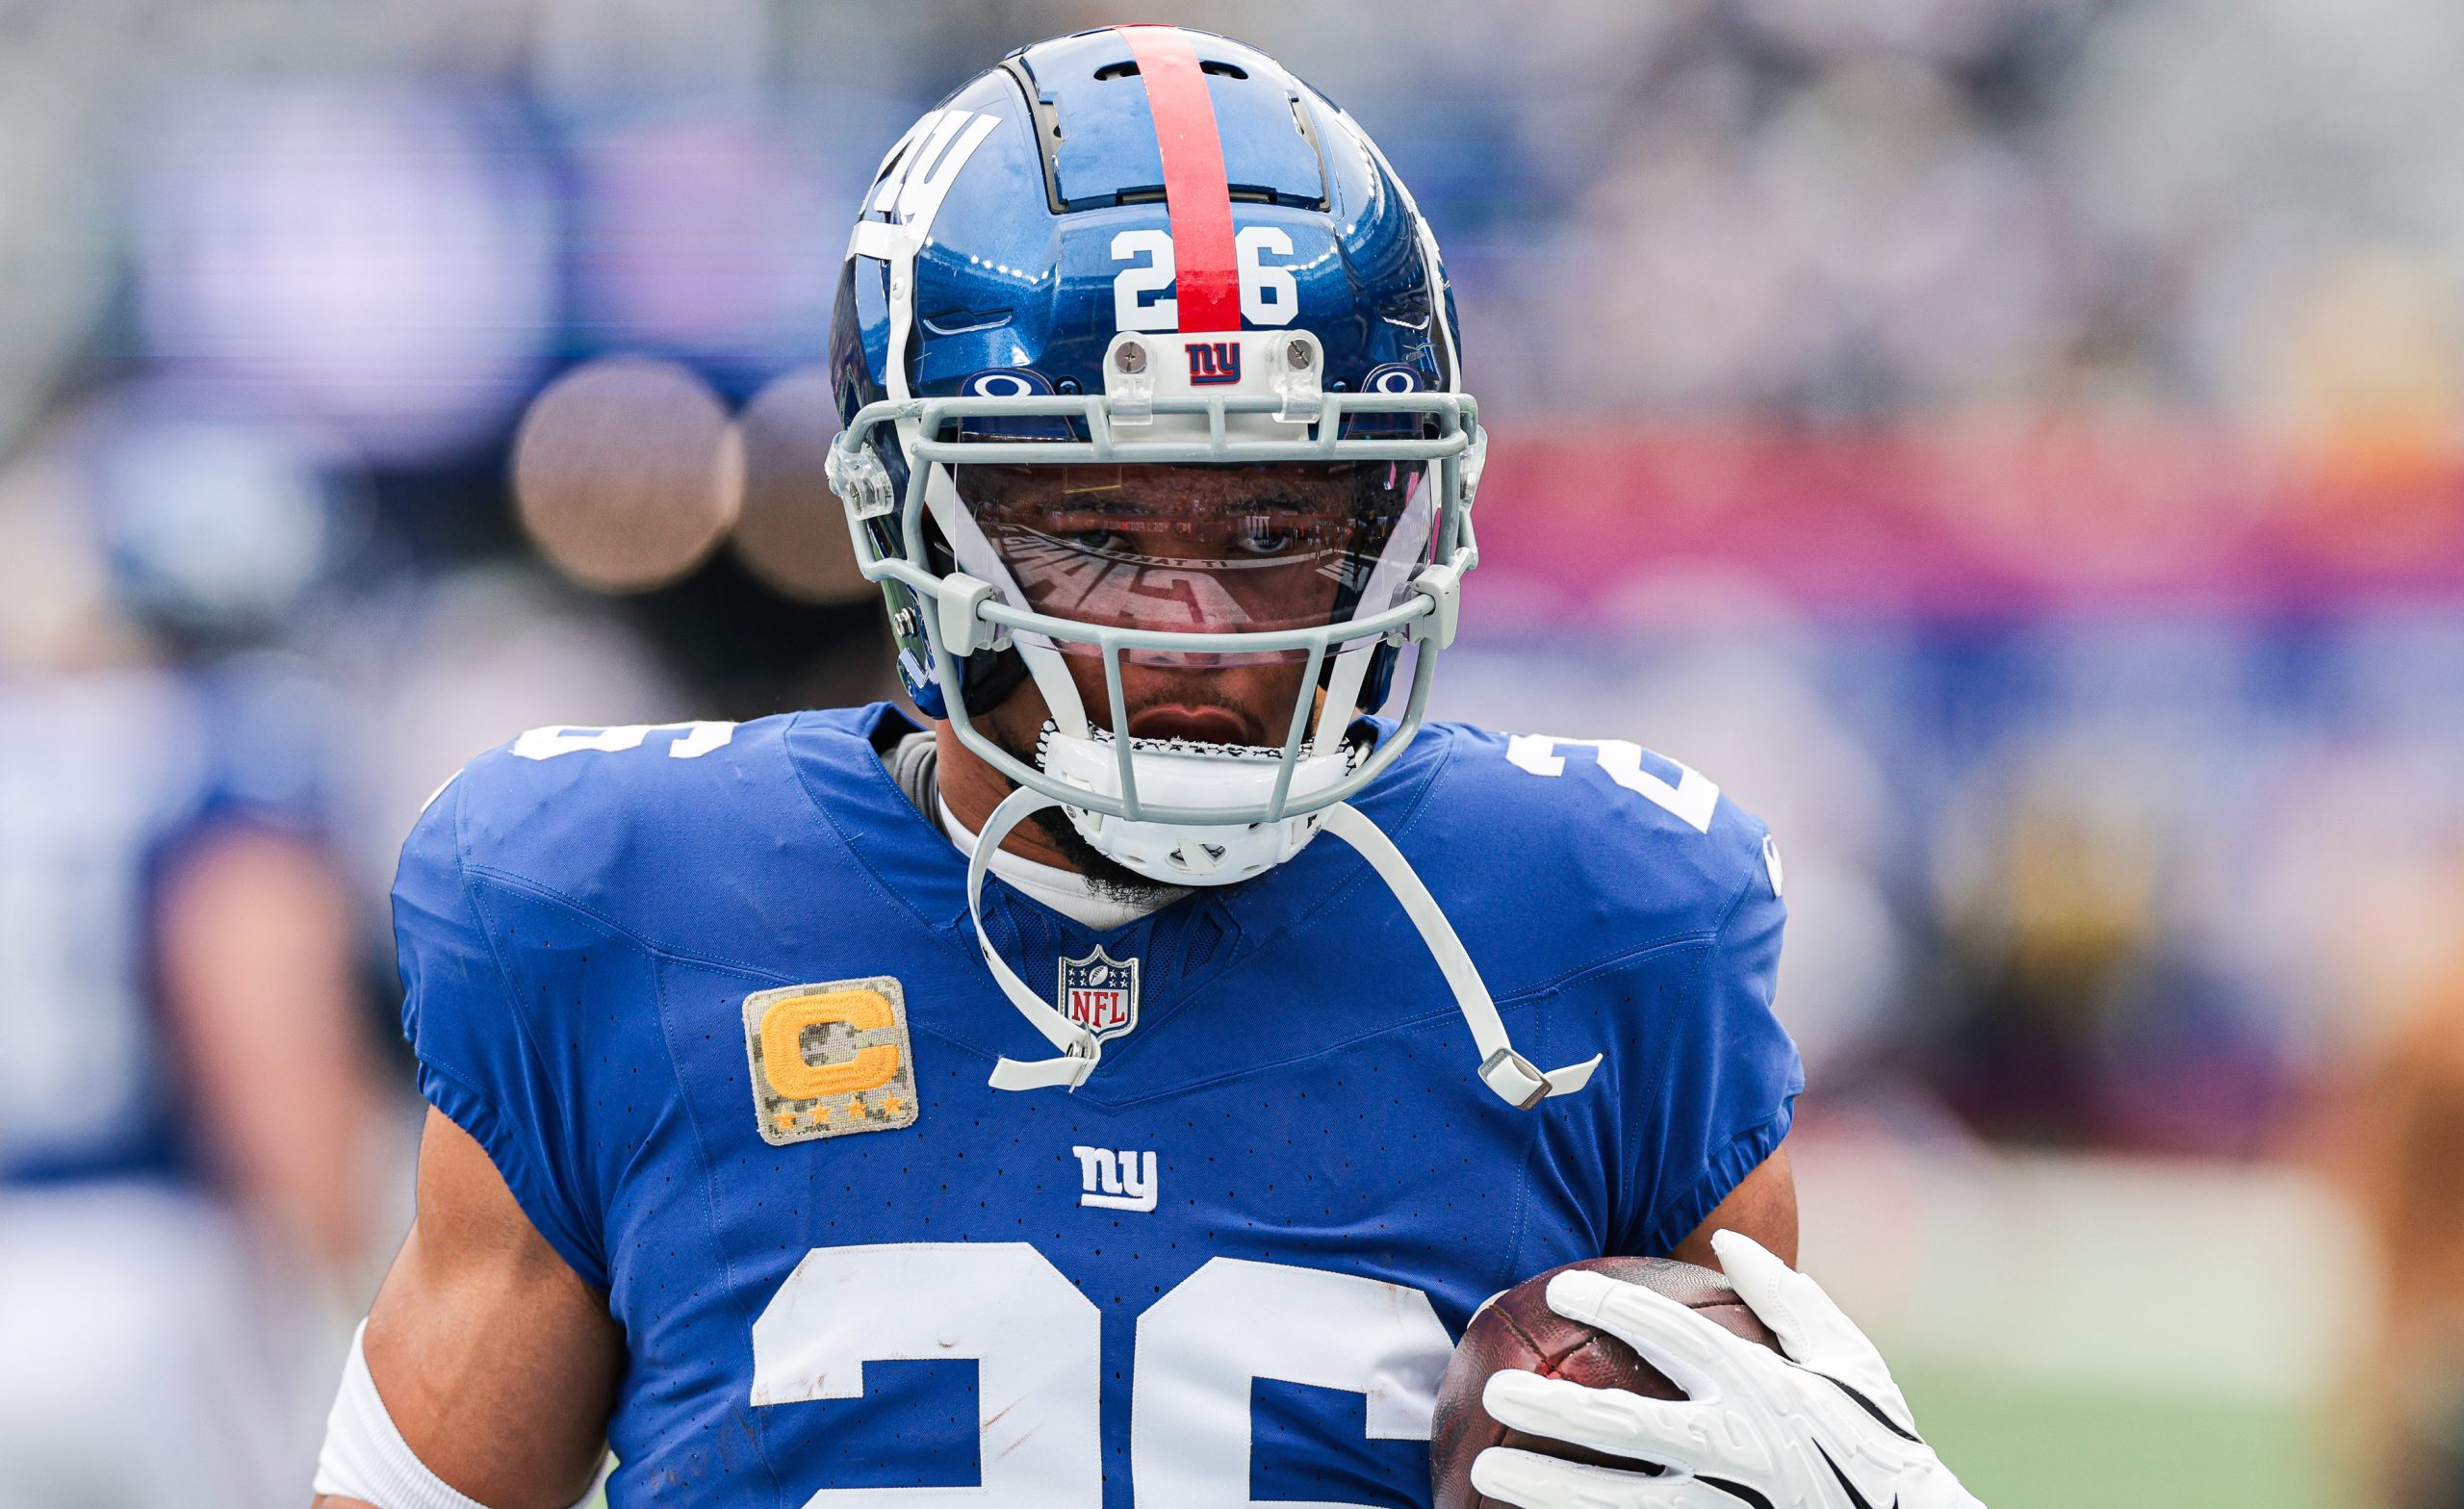 After another successful Sleep Out event, Saquon Barkley raised a whopping $1,310,577 as of Friday to battle homelessness. Photo Credit: Vincent Carchietta-USA TODAY Sports